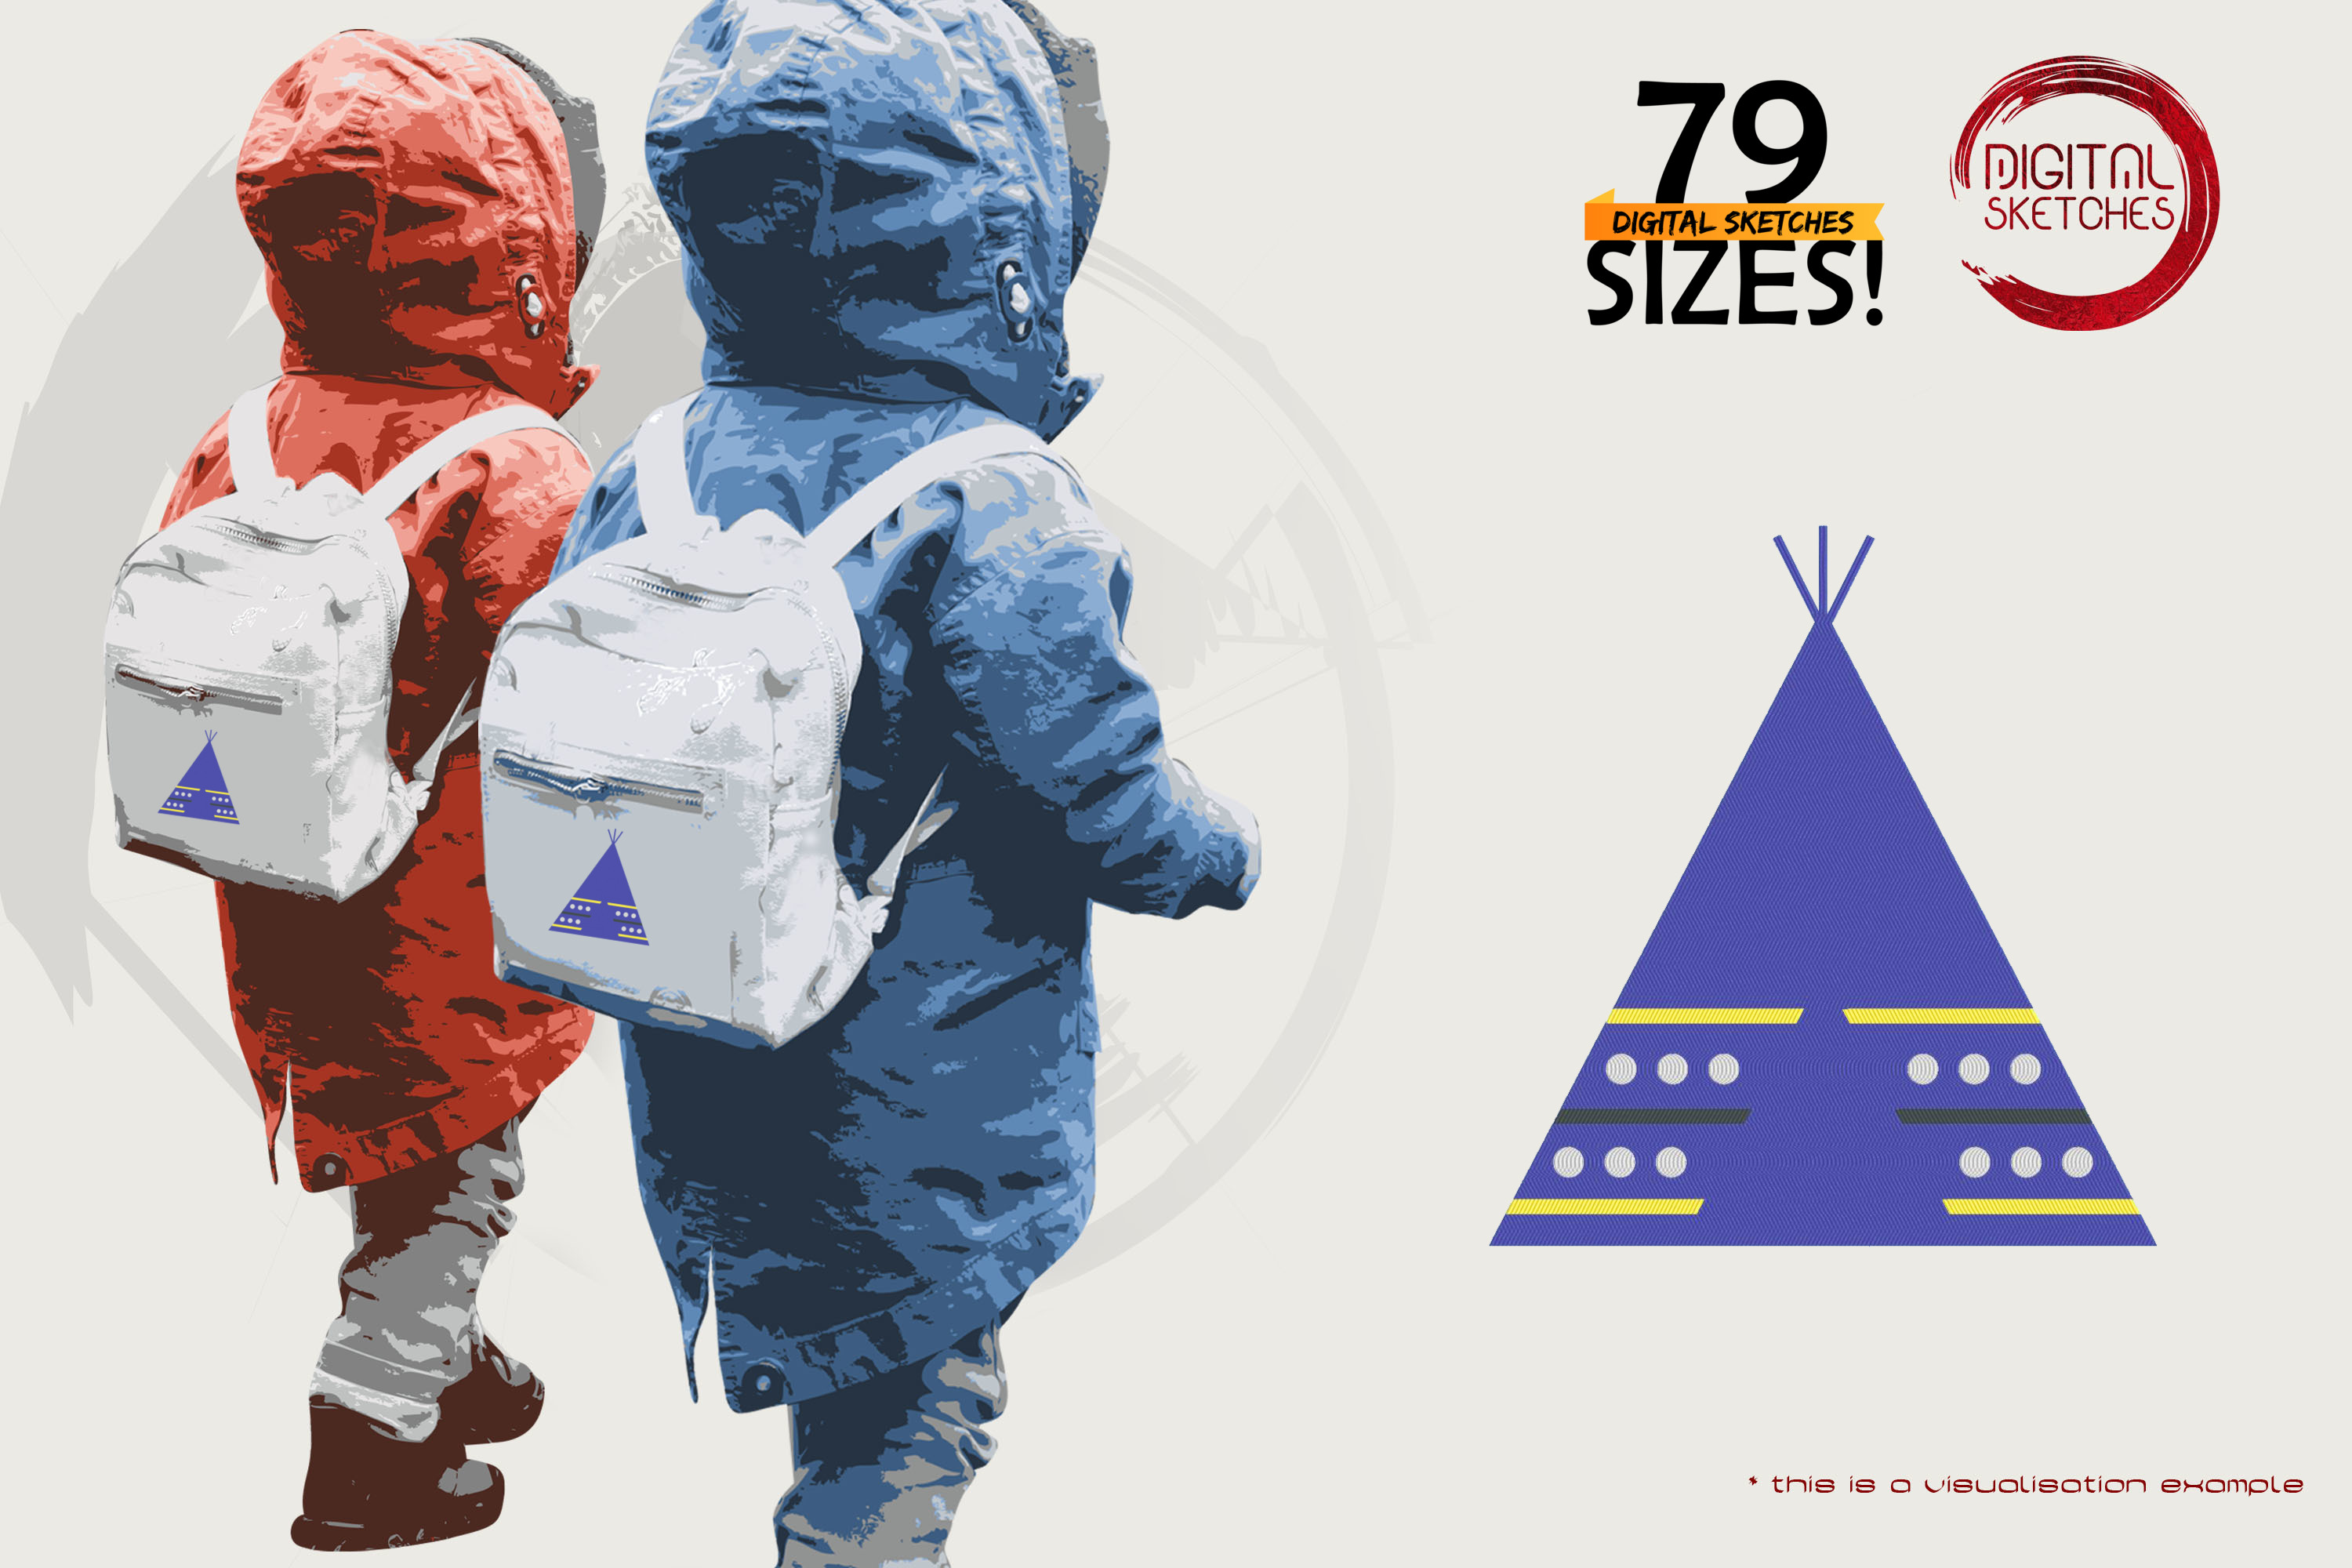 Tipi-Teepee-Tepee-Tent-Native American Peoples Of North America